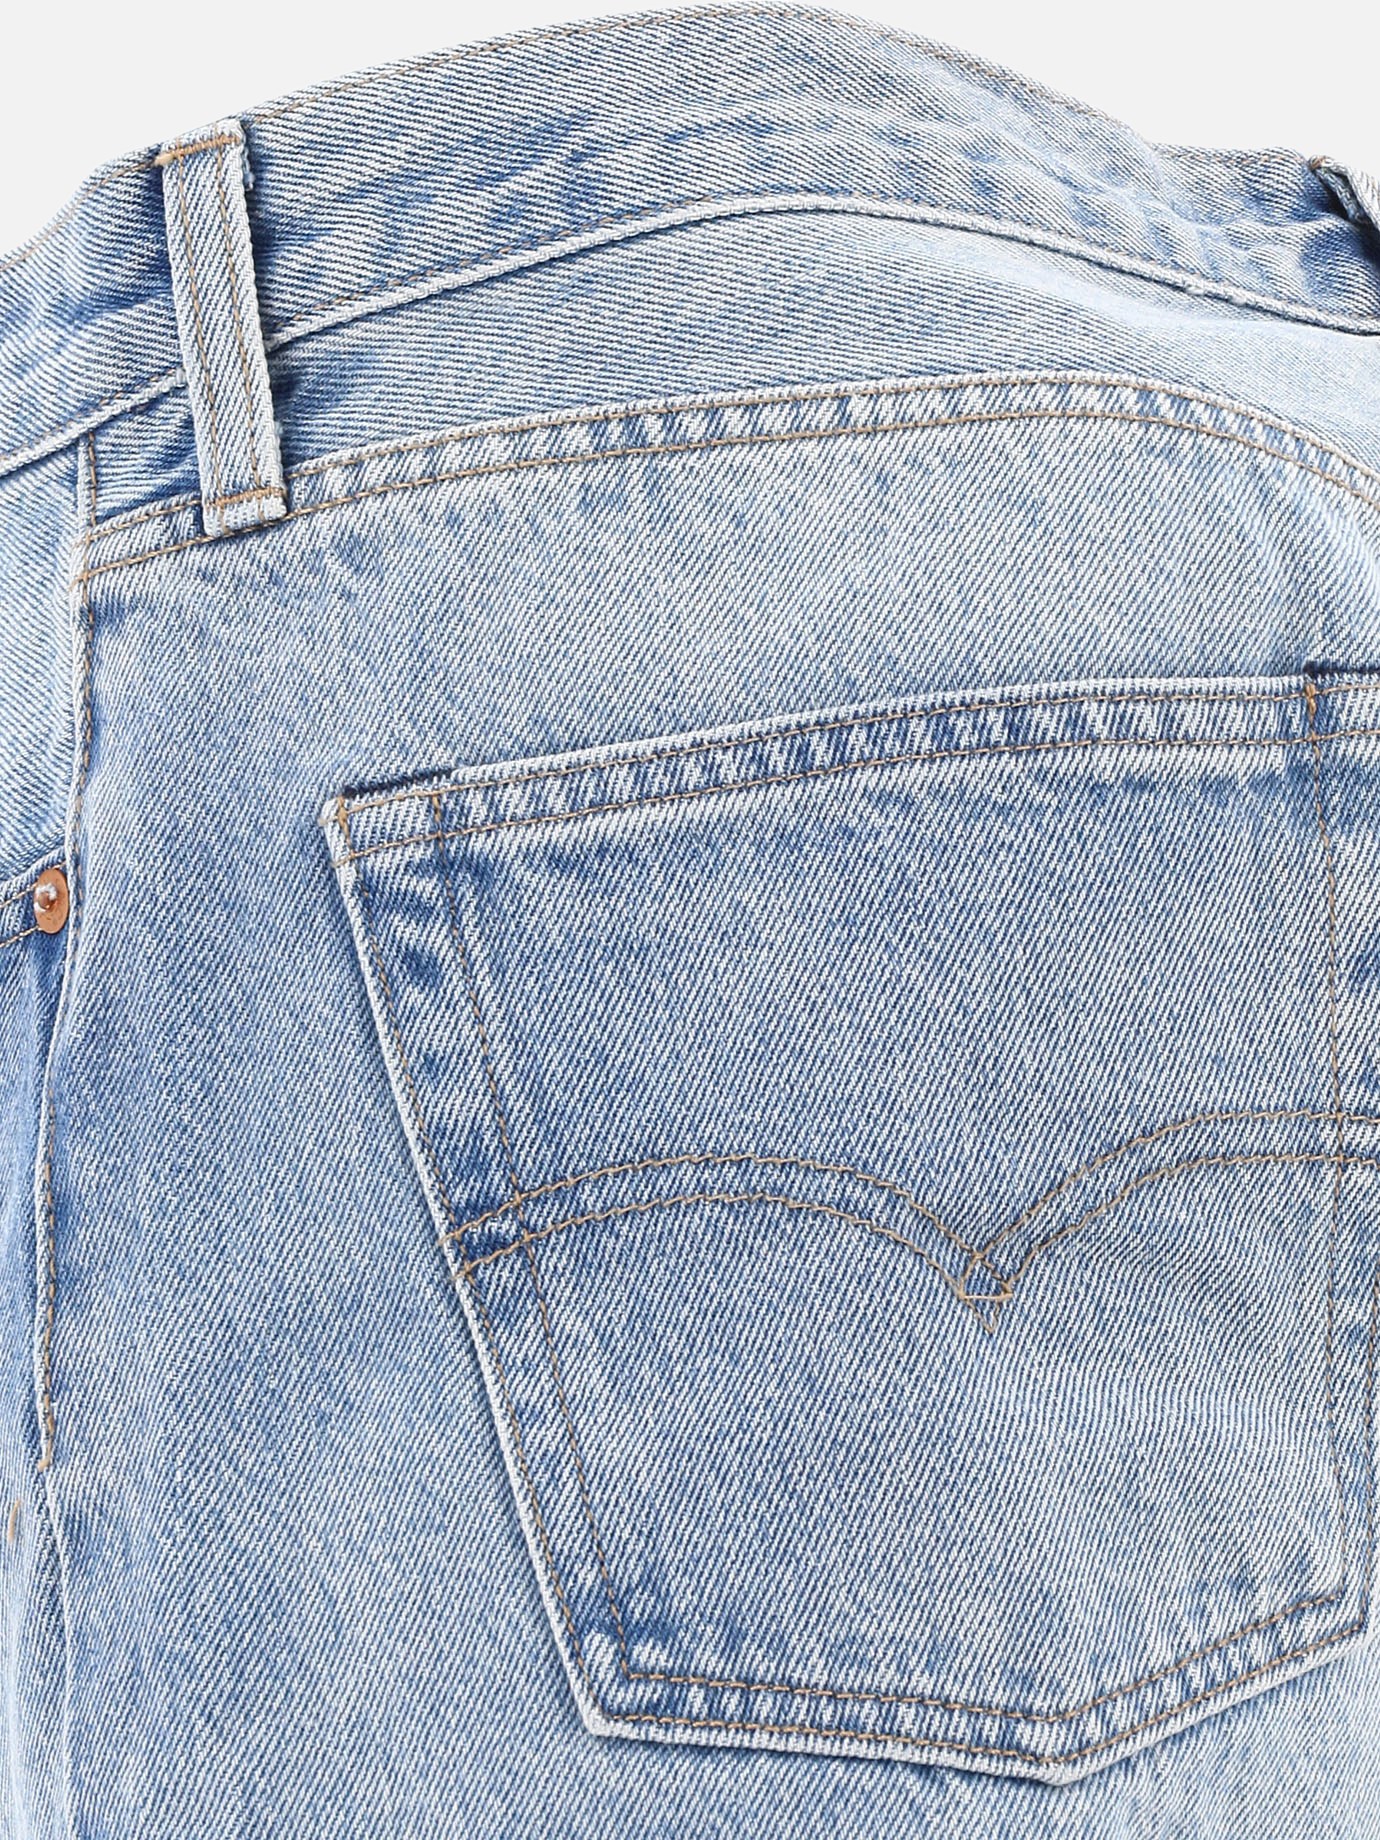  501  jeans by Levi's Made & Crafted